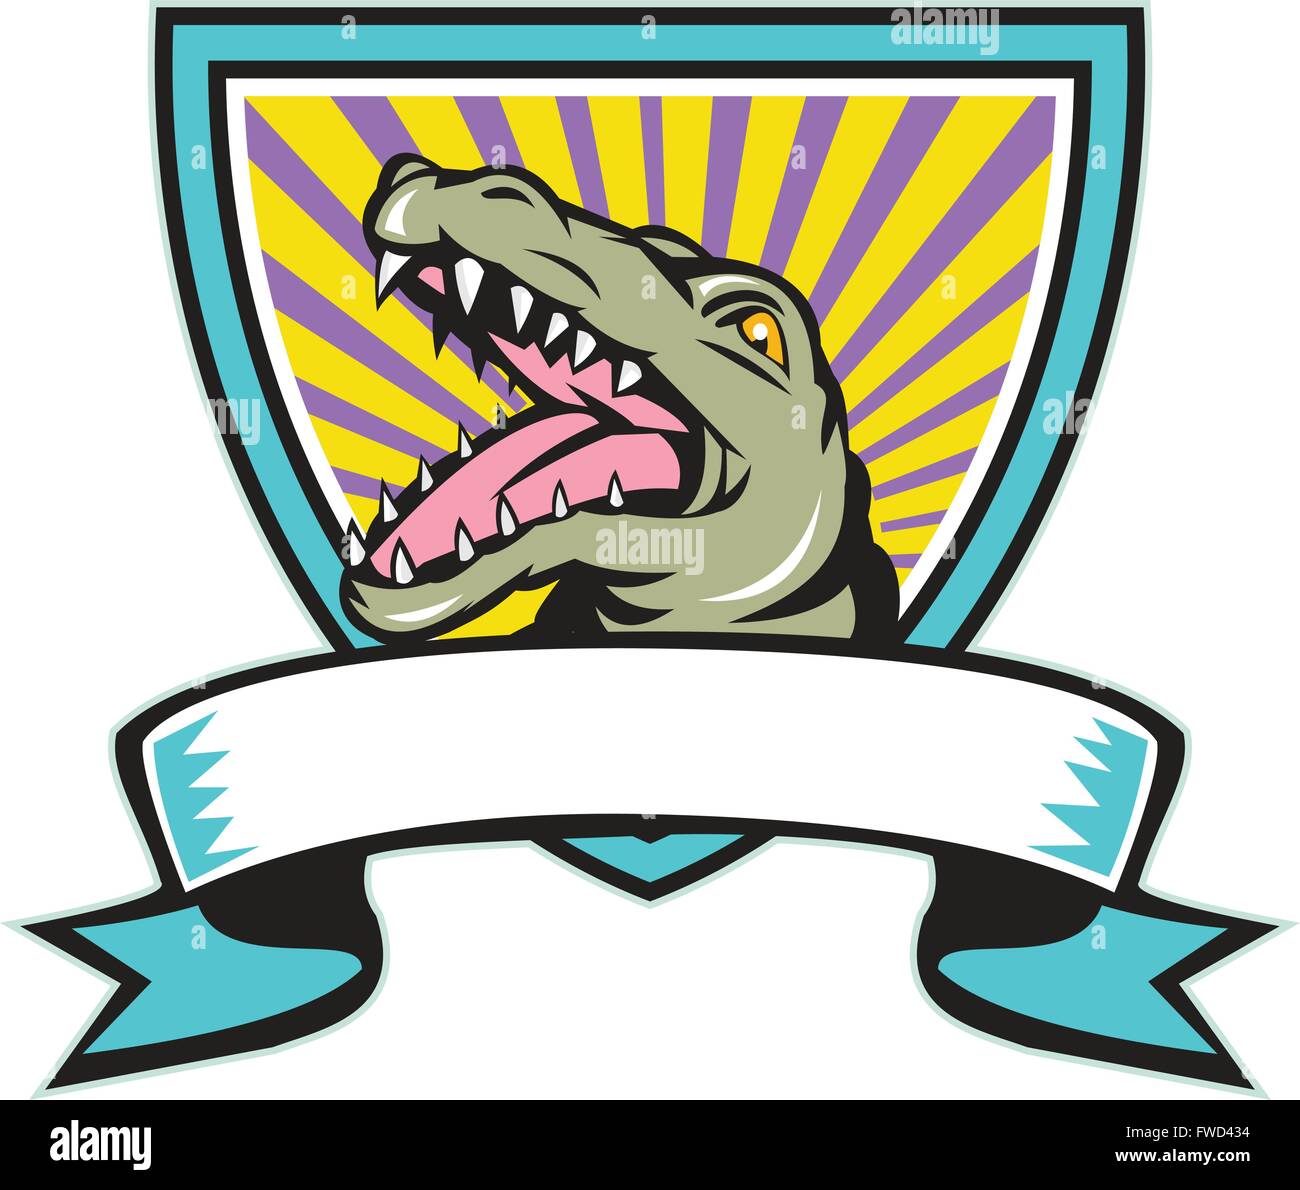 Illustration of an angry gator alligator crocodile head snout snapping set inside crest shield with ribbon scroll in front done Stock Vector